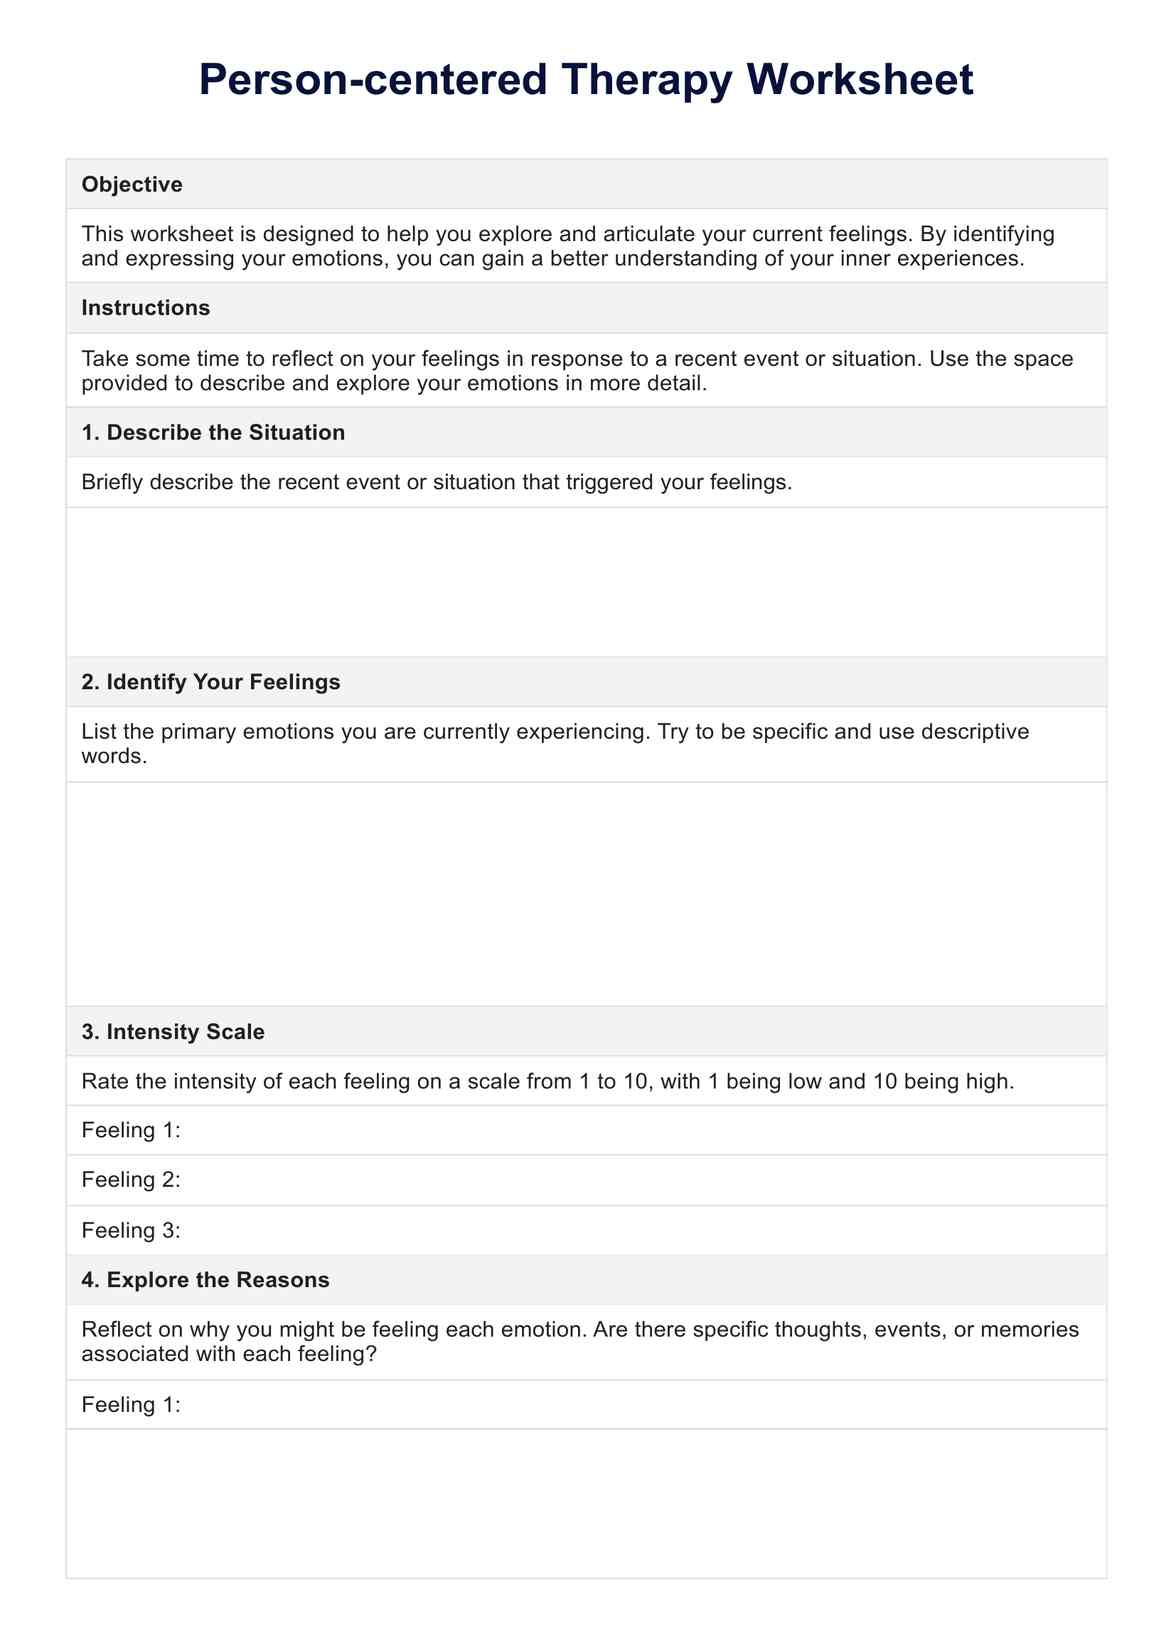 Person-Centered Therapy Worksheets PDF Example